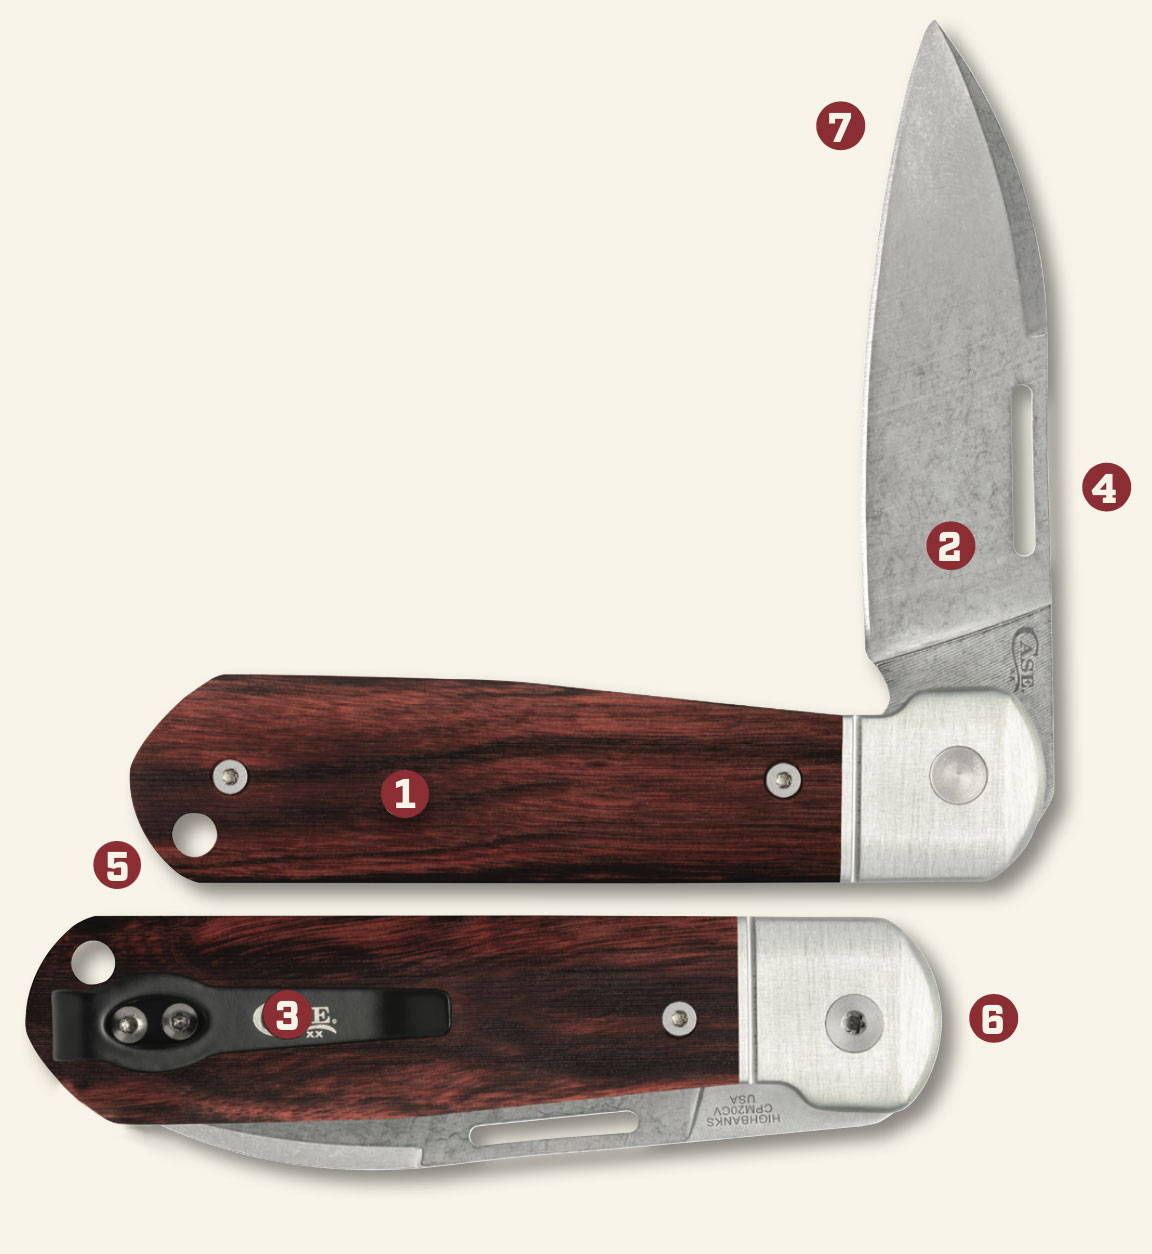 Highbanks knife with feature highlights.